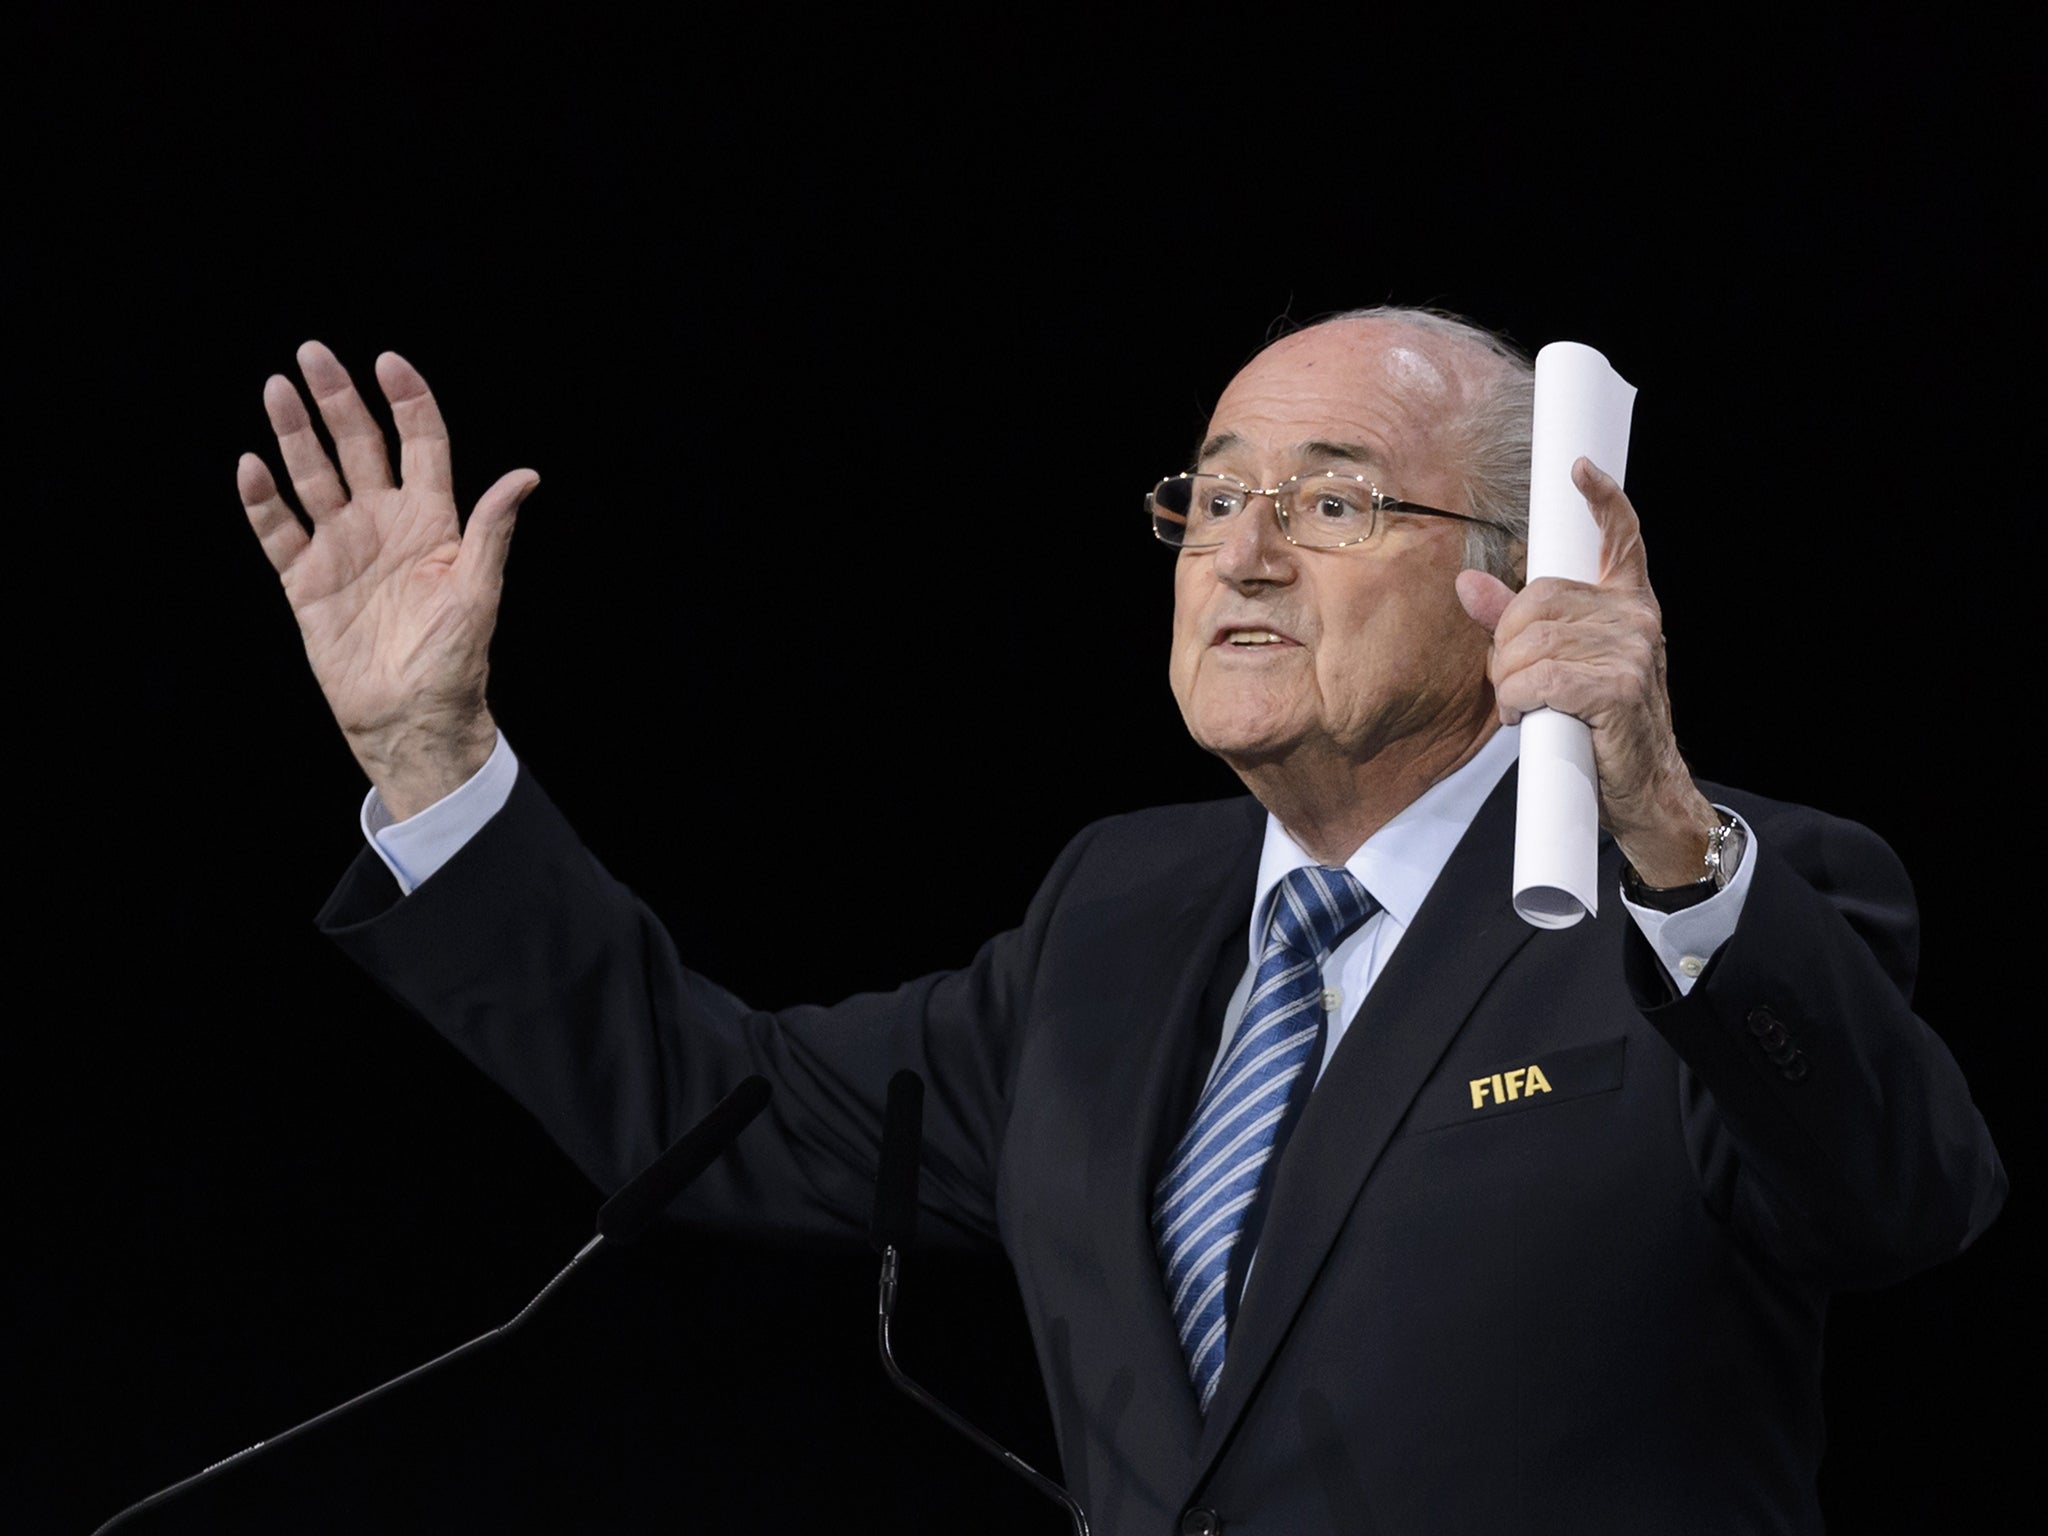 Sepp Blatter will serve a fifth term as Fifa president after winning the election